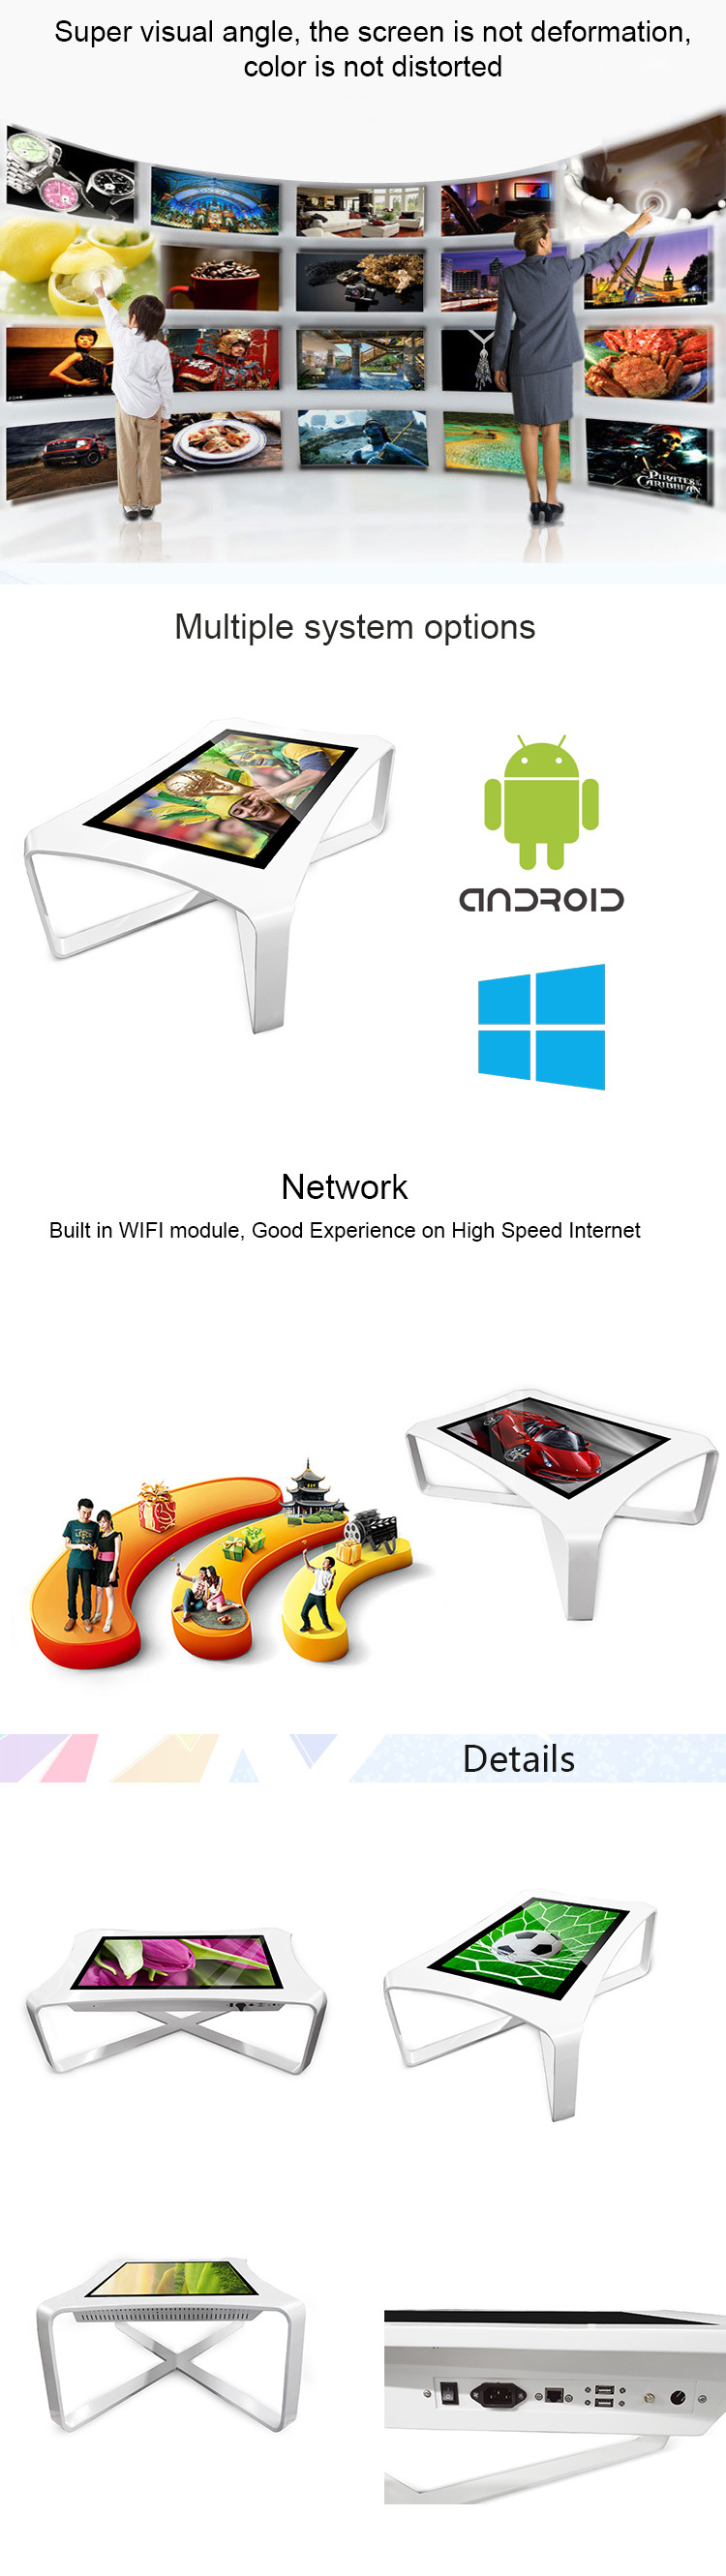 Floor Stand Scree Network WiFi Commercial Digital Signage Kiosk